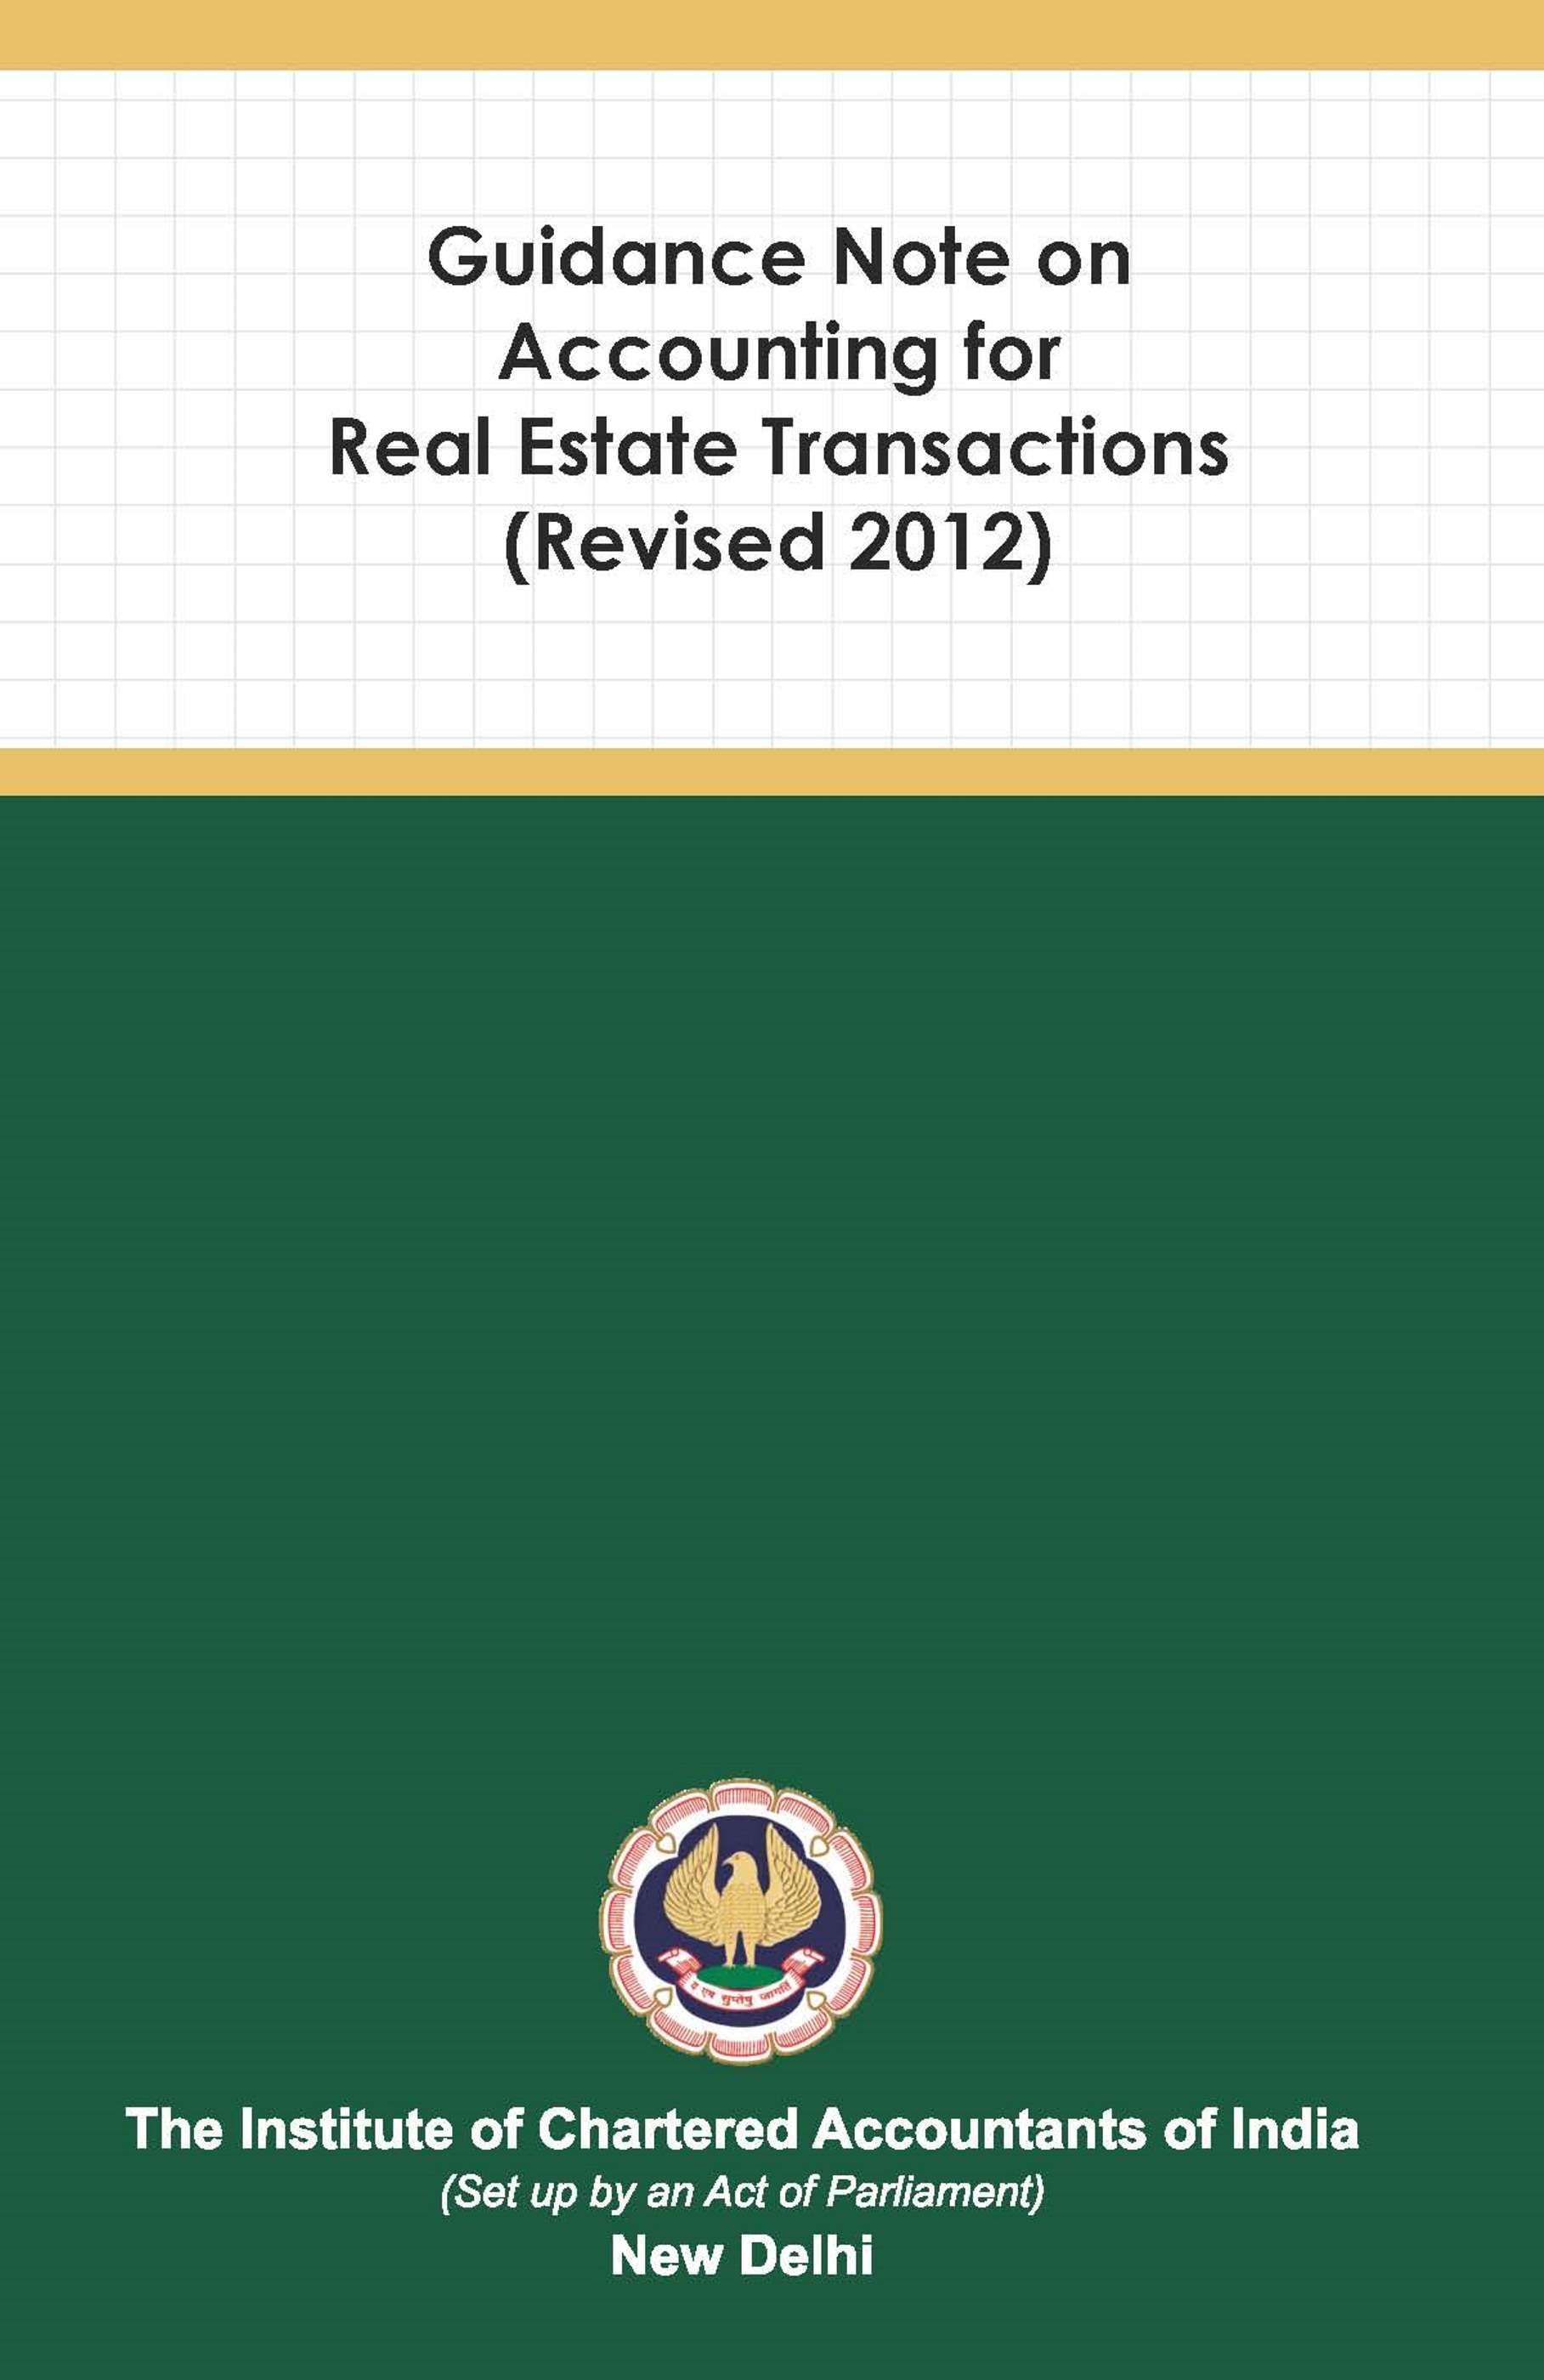 Guidance Note on Accounting for Real Estate Transaction (Revised 2012)